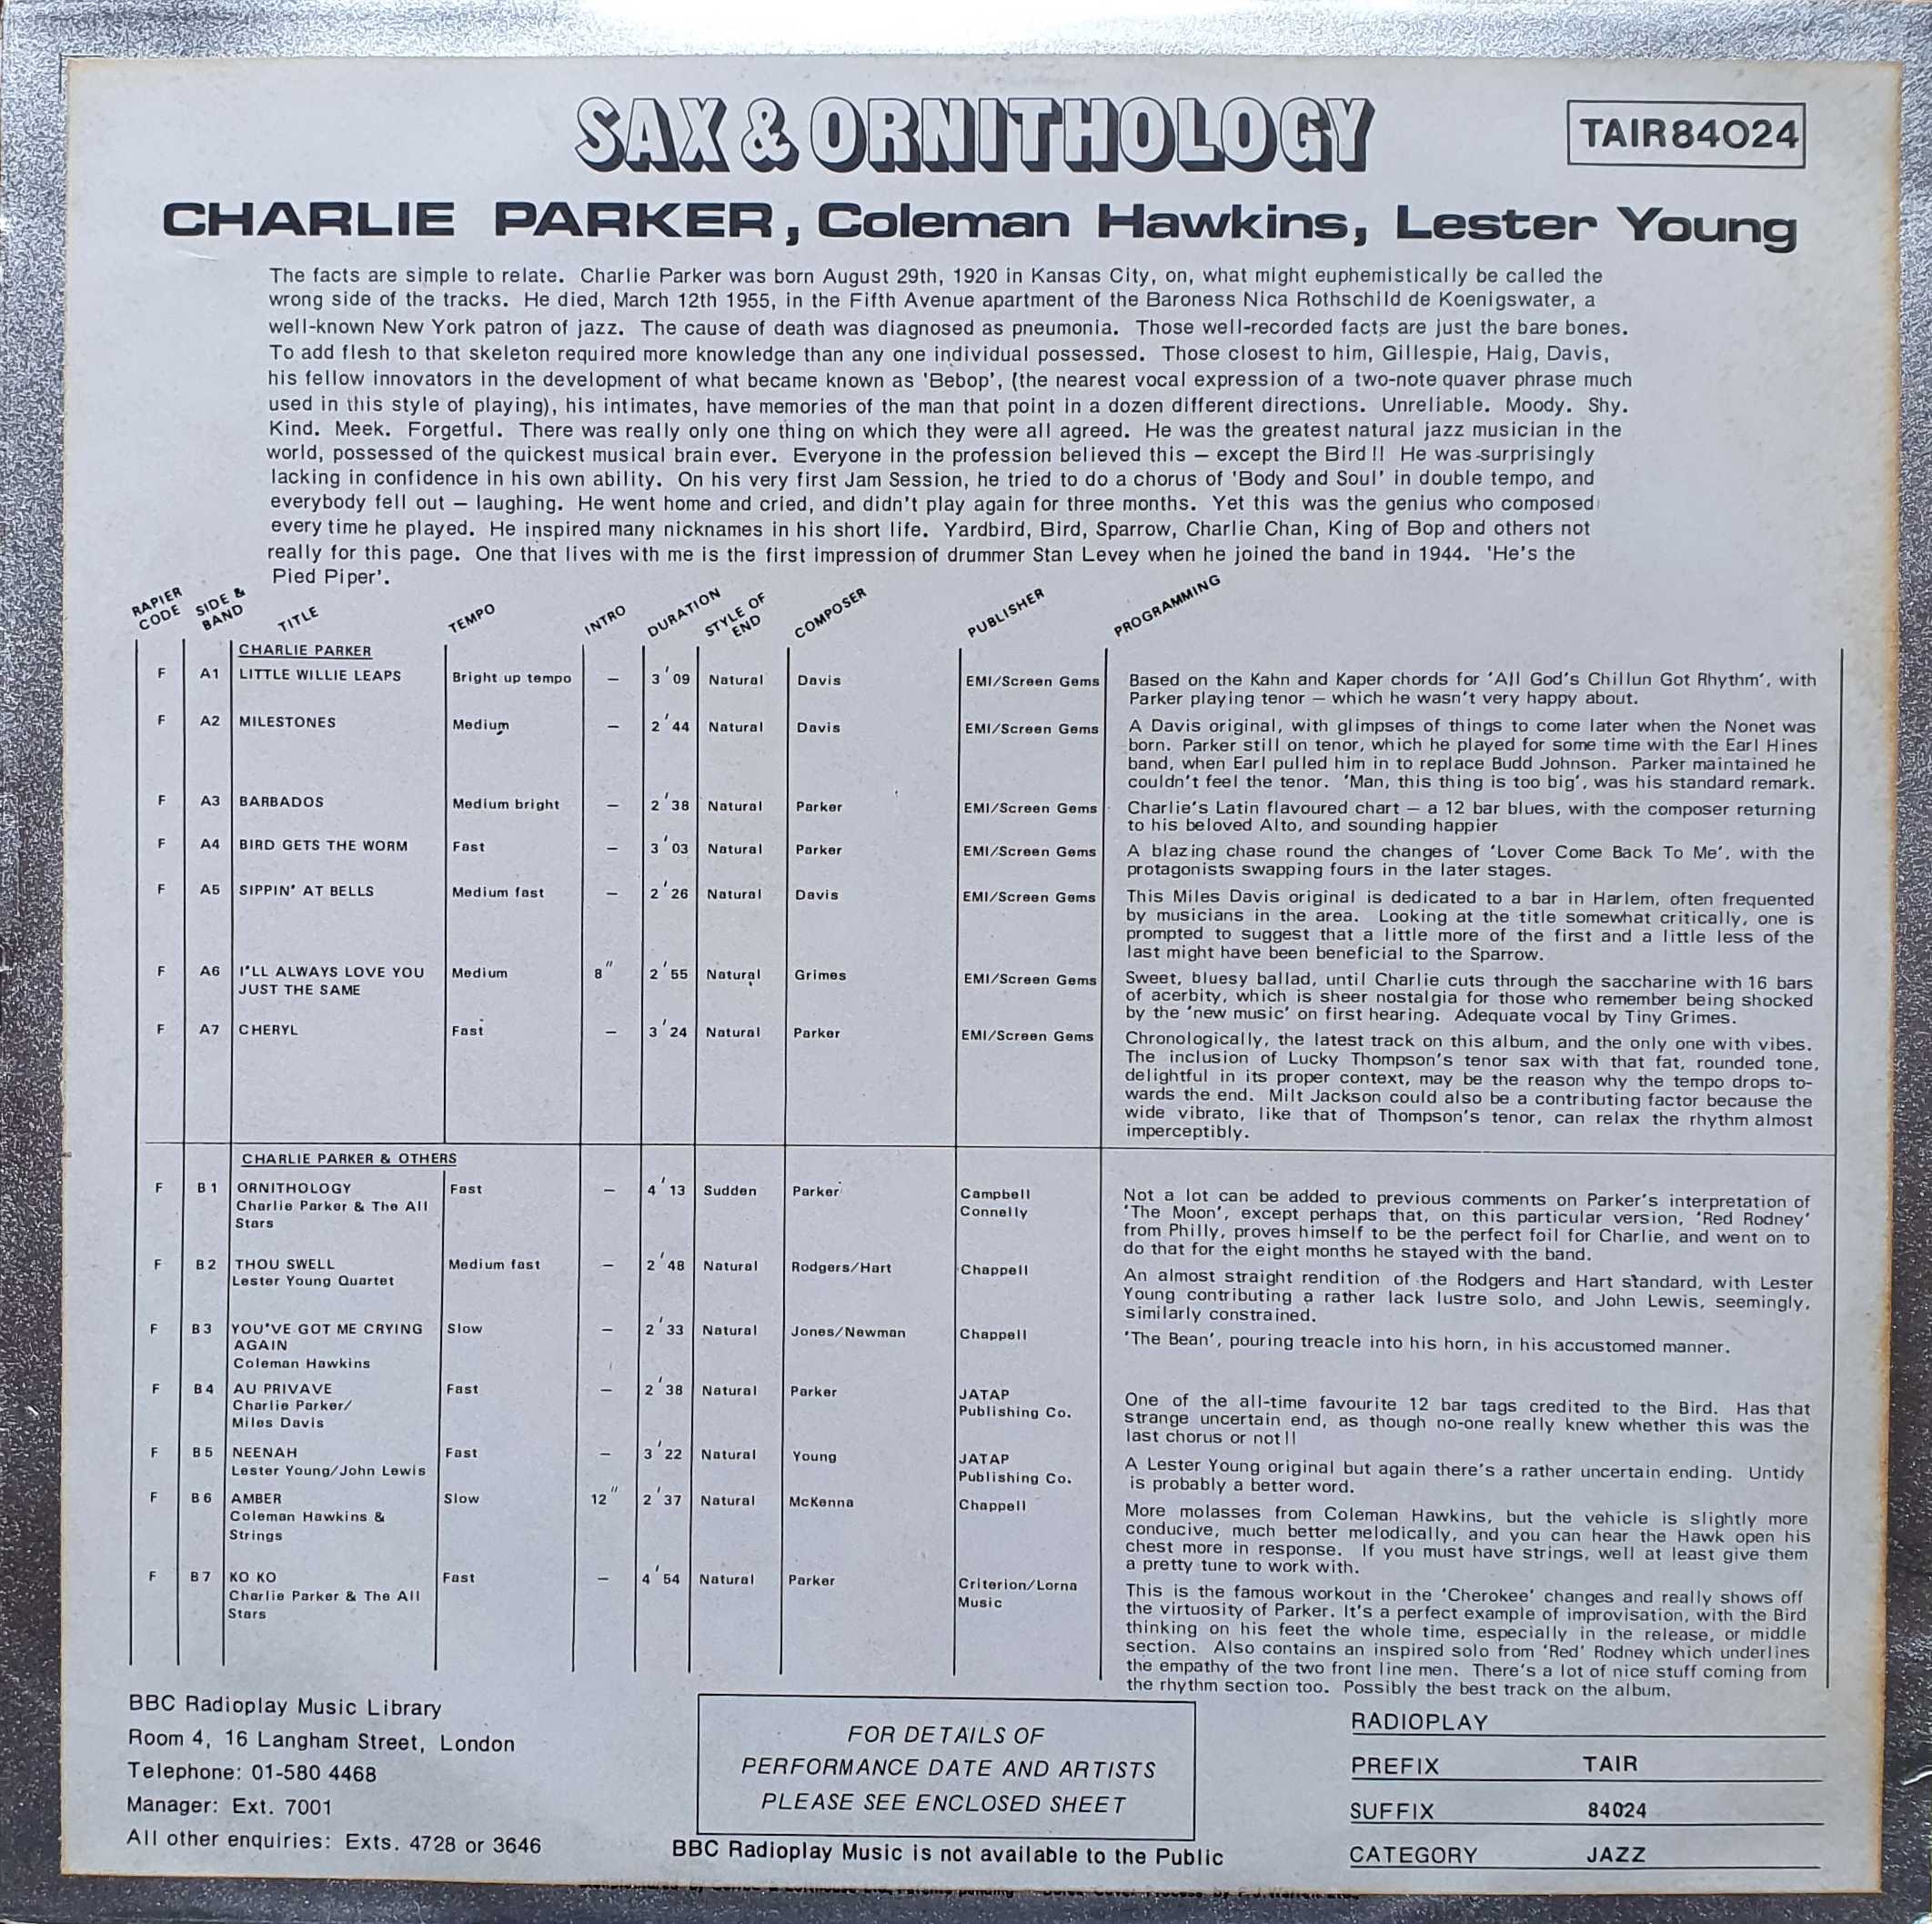 Picture of TAIR 84024 Sax & ornithology by artist Charlie Parker / Coleman Hawkins / Lester Young from the BBC records and Tapes library